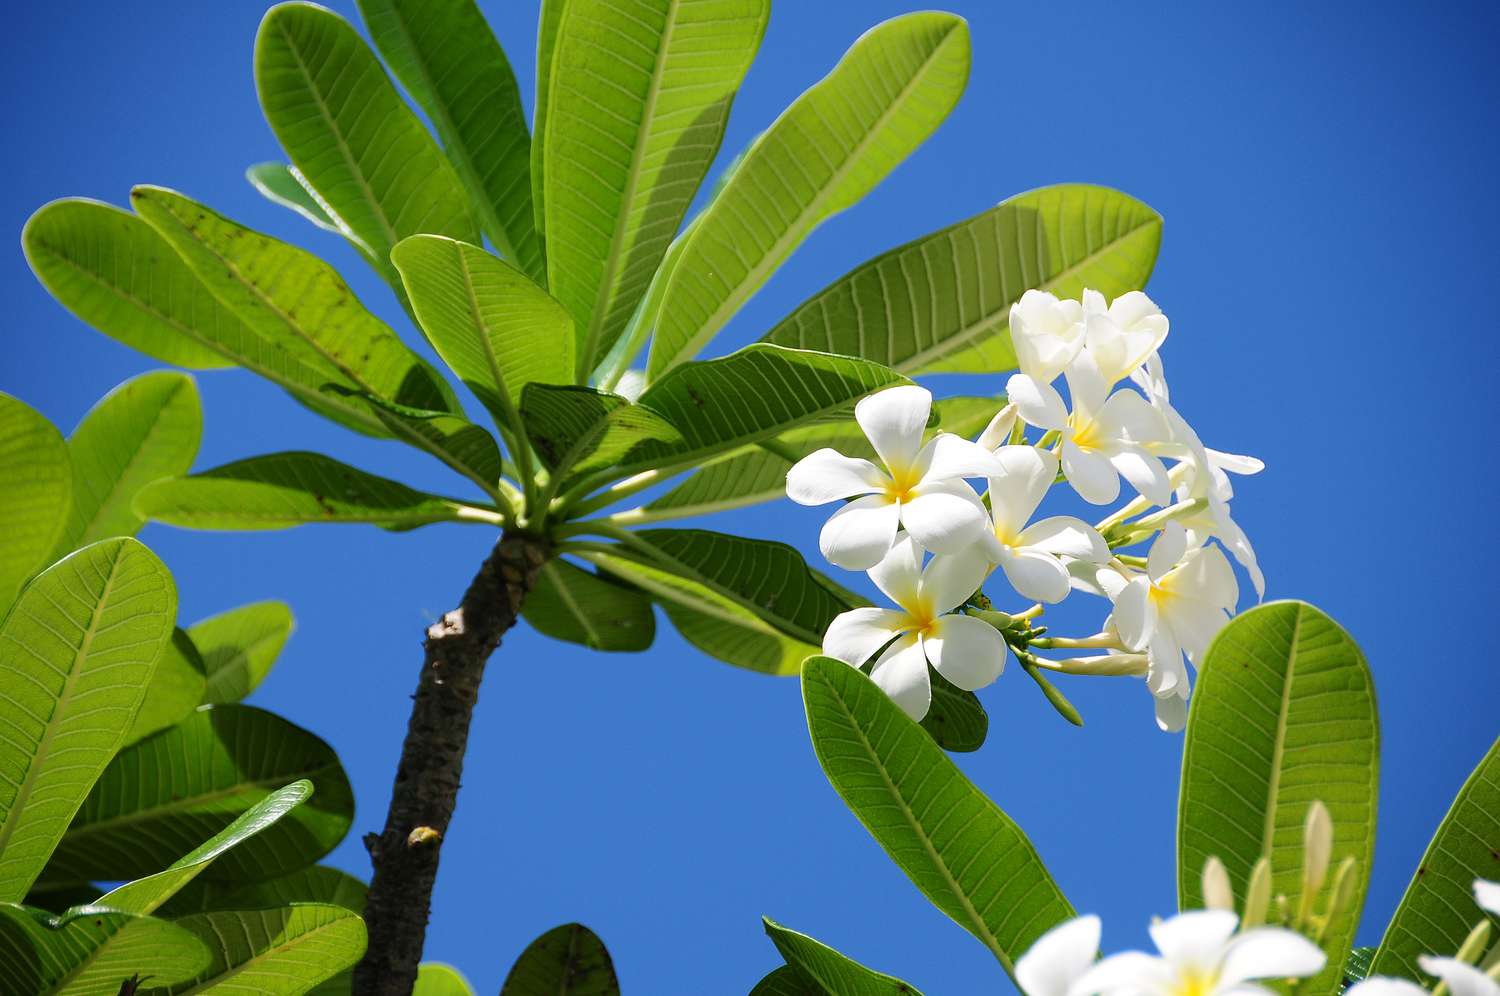 Plumeria plant with small white flowers under oblong leaves